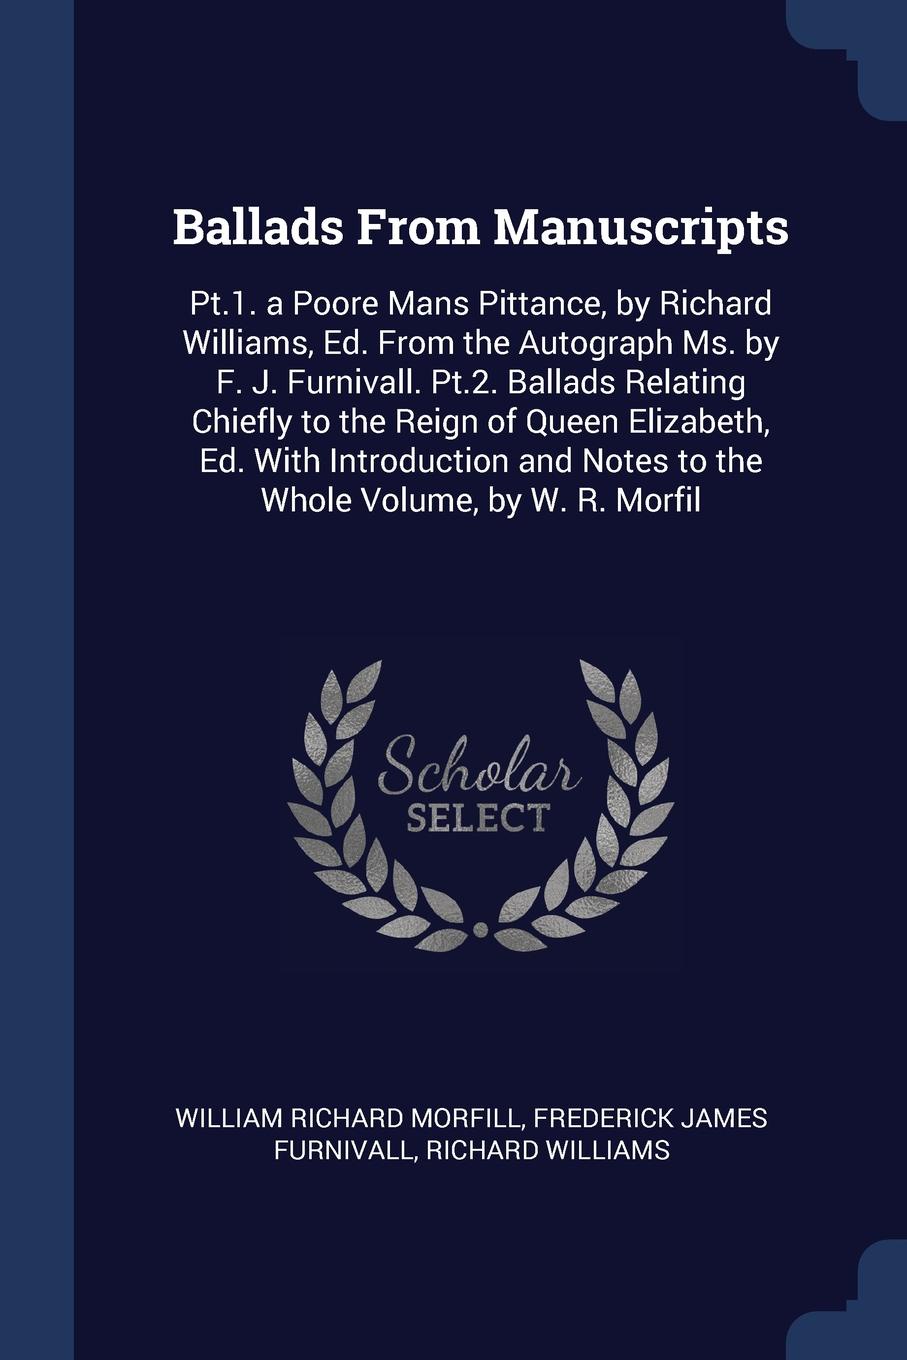 Ballads From Manuscripts. Pt.1. a Poore Mans Pittance, by Richard Williams, Ed. From the Autograph Ms. by F. J. Furnivall. Pt.2. Ballads Relating Chiefly to the Reign of Queen Elizabeth, Ed. With Introduction and Notes to the Whole Volume, by W. R...